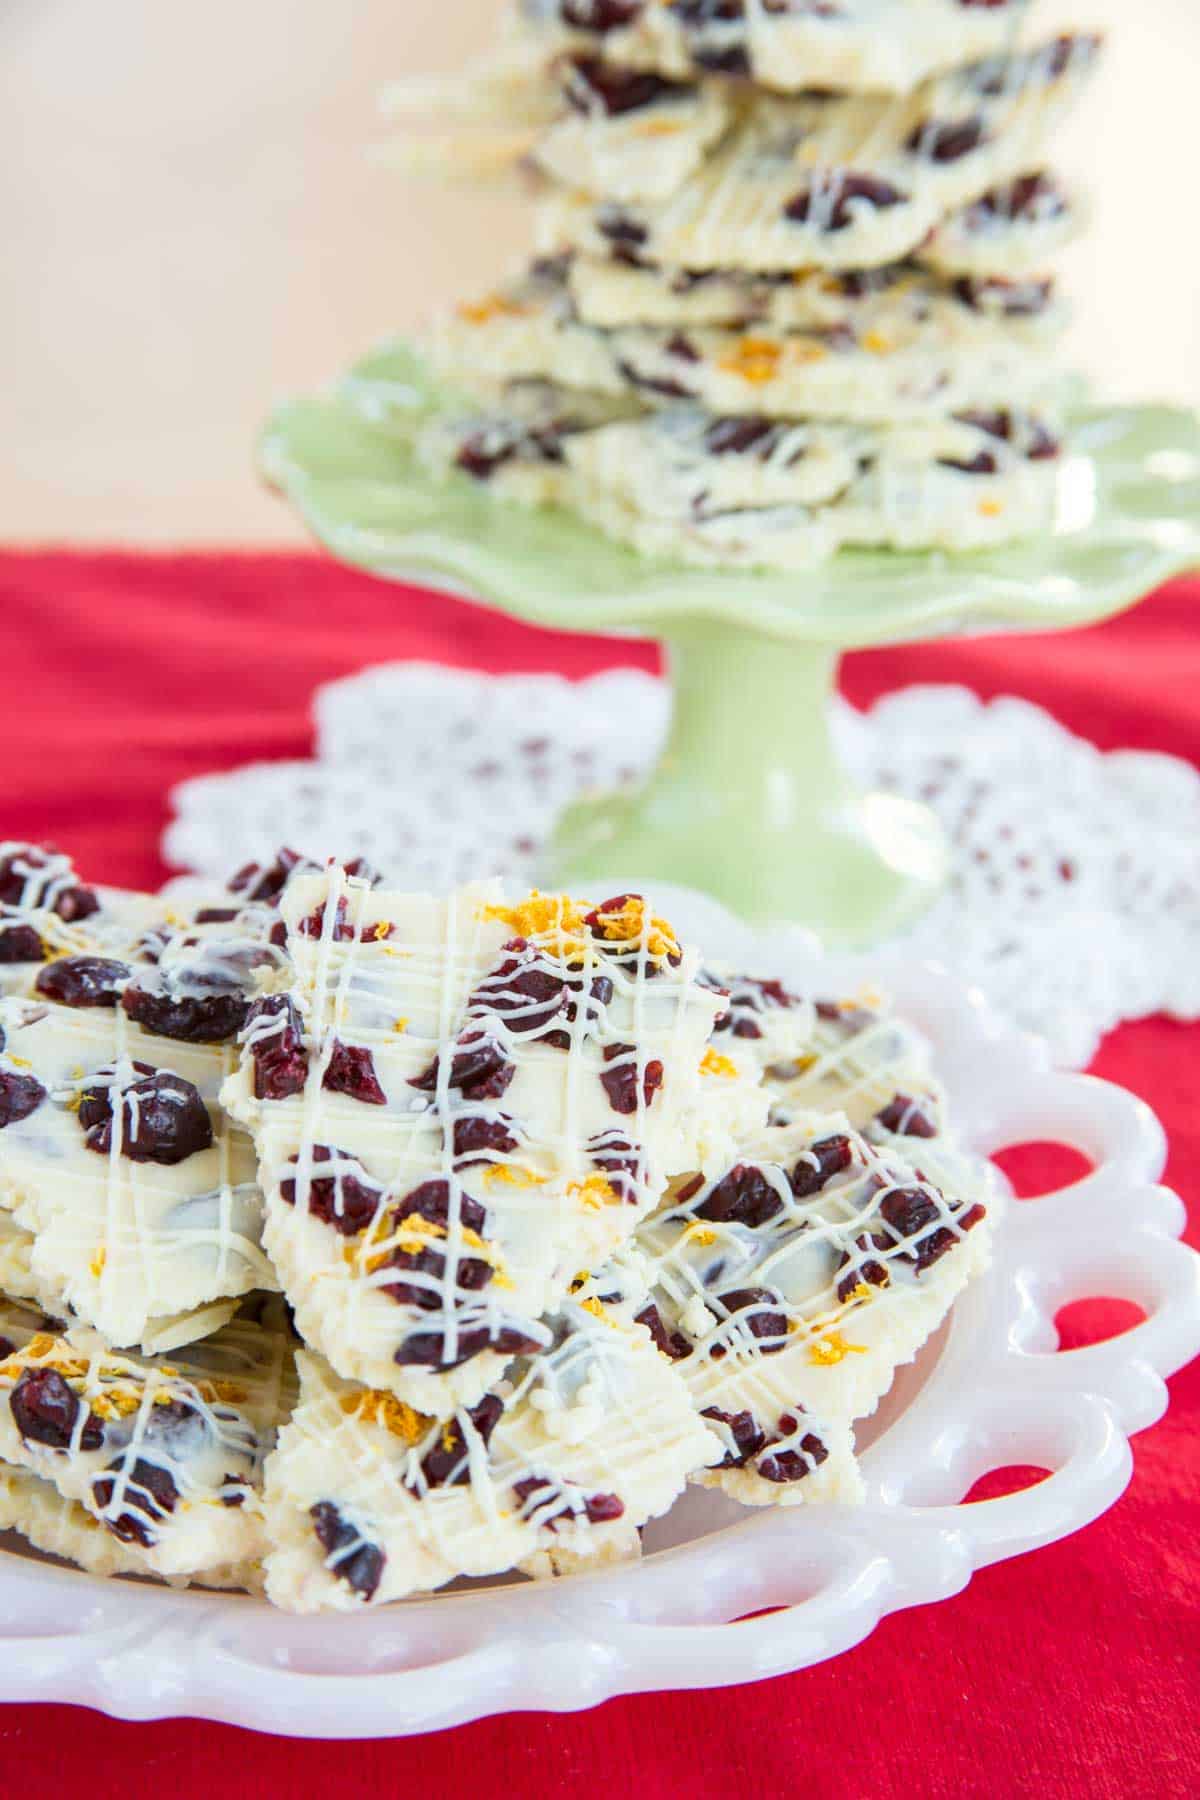 Cranberry White Chocolate Bark inspired by Starbucks Cranberry Bliss Bars